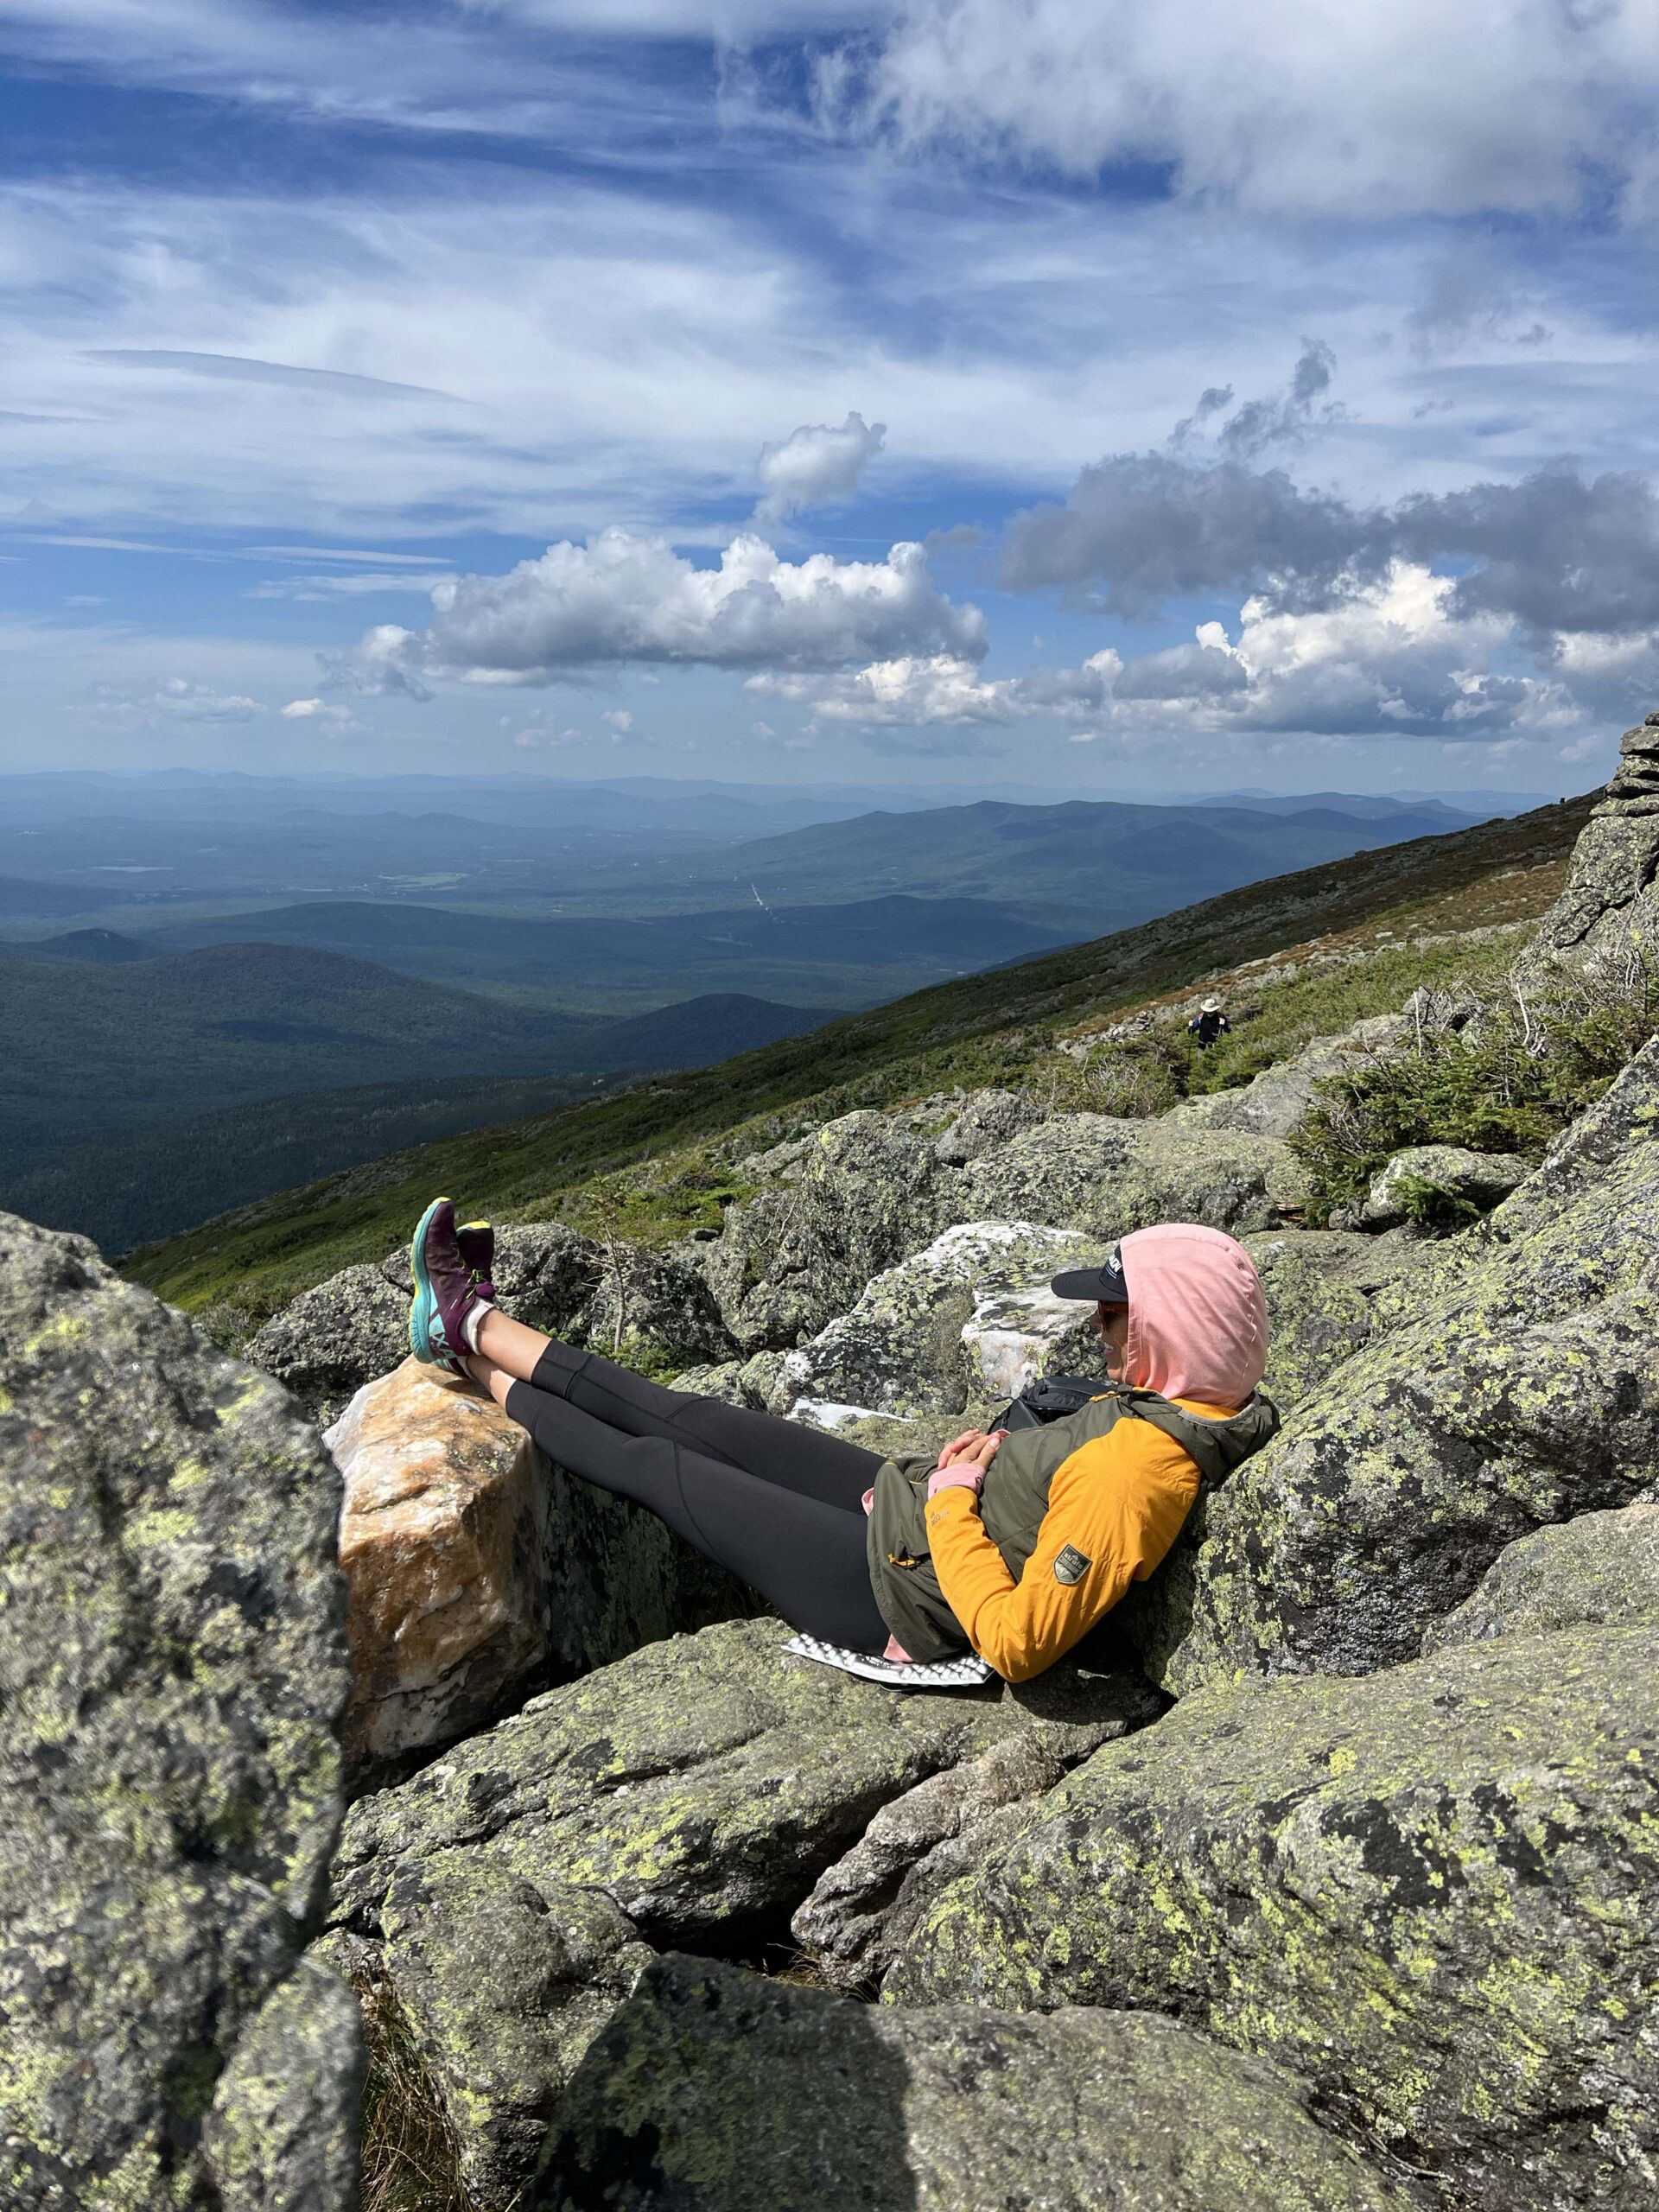 Kristin Sinnott reviews the Therm-a-Rest Z Seat for BLISTER.